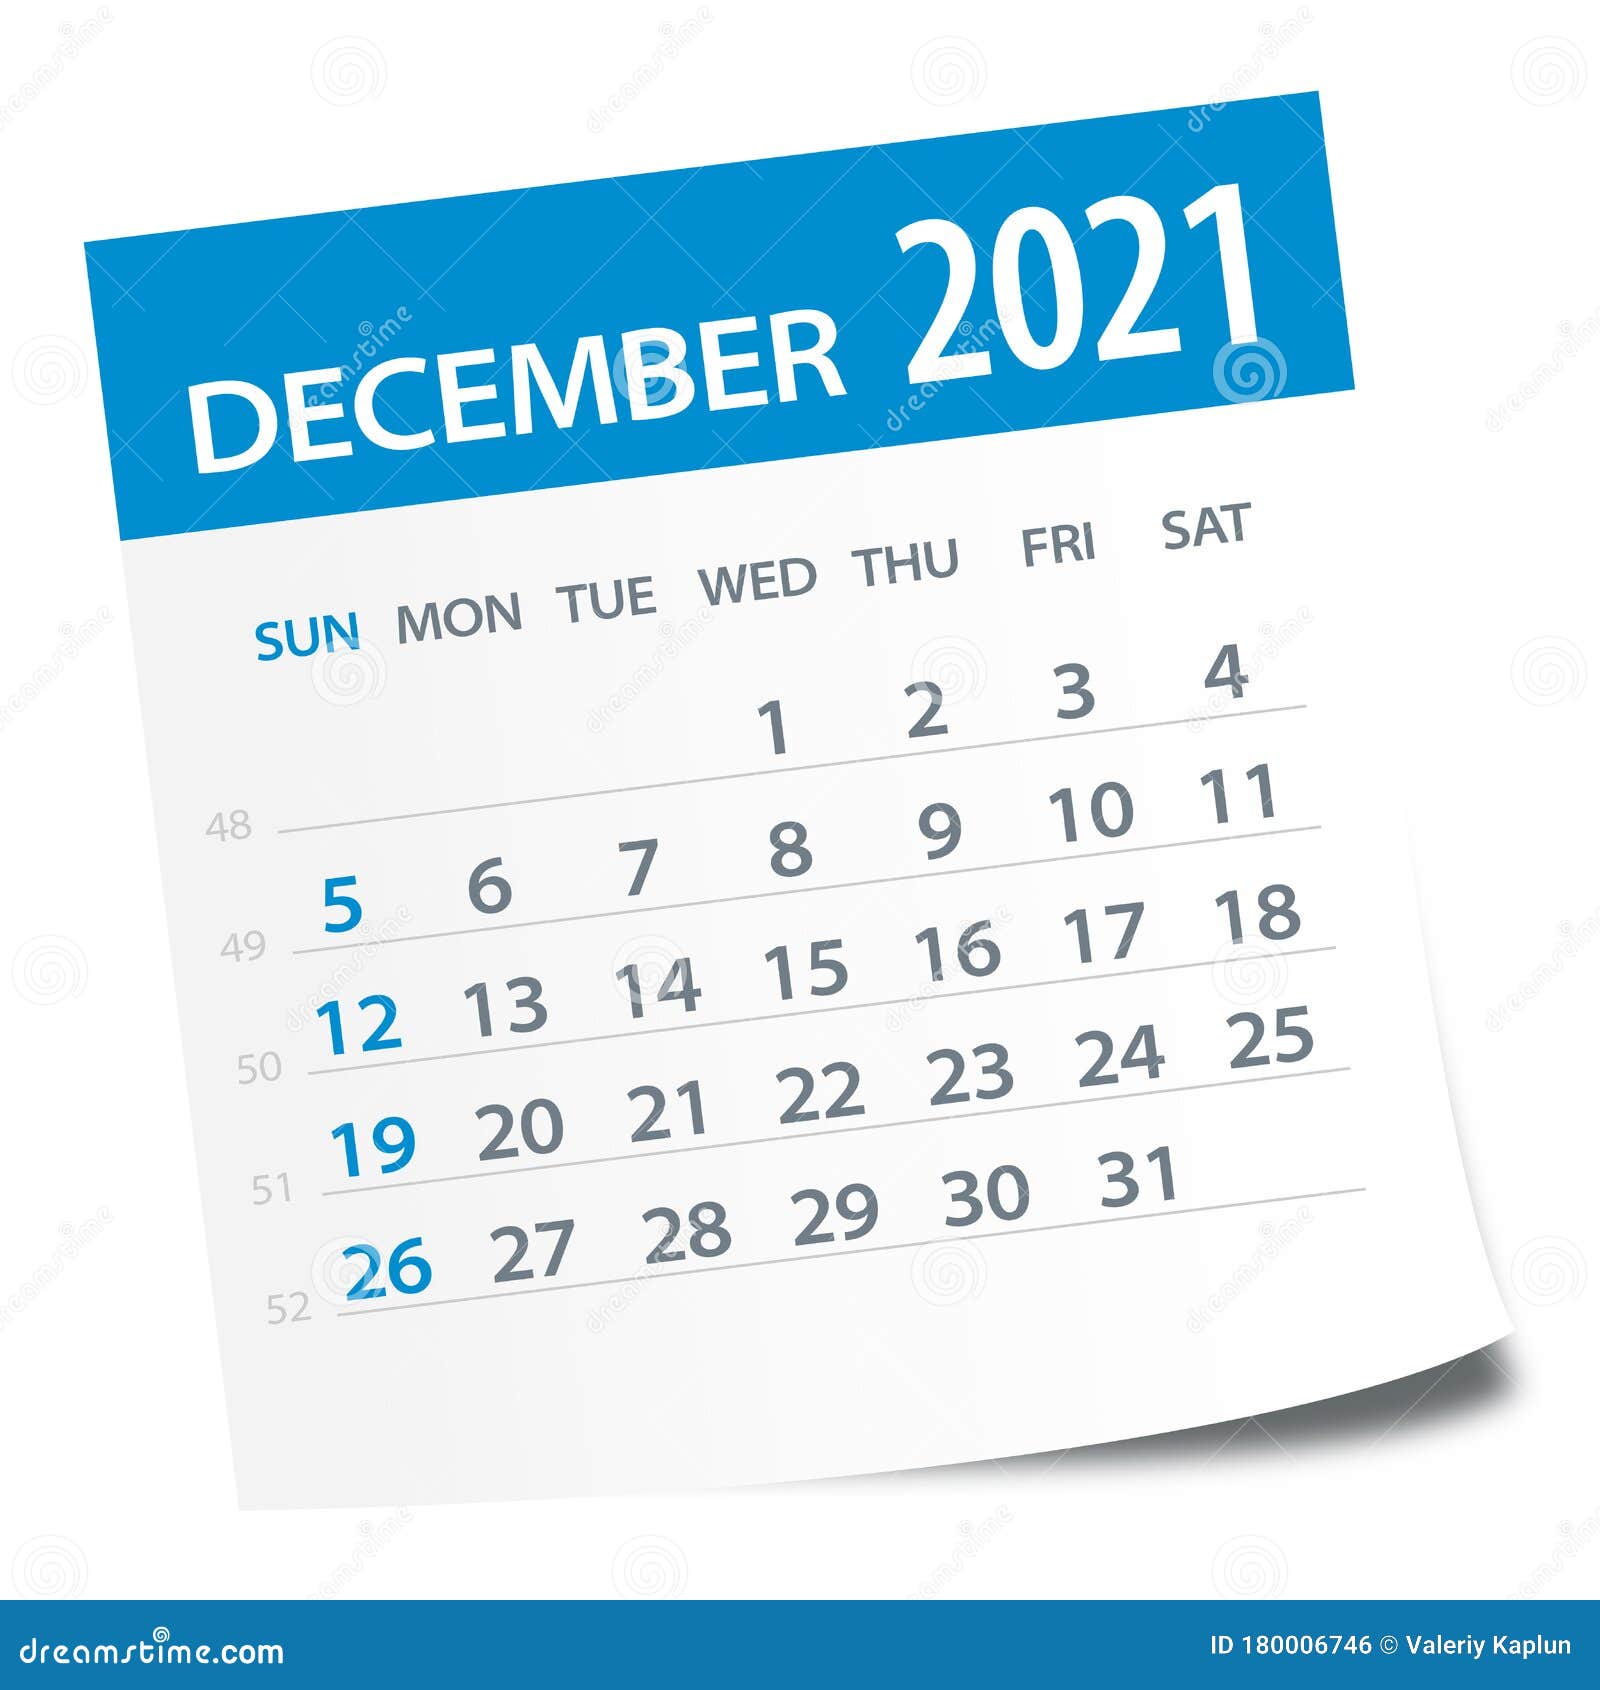 Featured image of post December 2021 Calendar With Holidays / Calendar to the past and upcoming seasons for the calendar year.